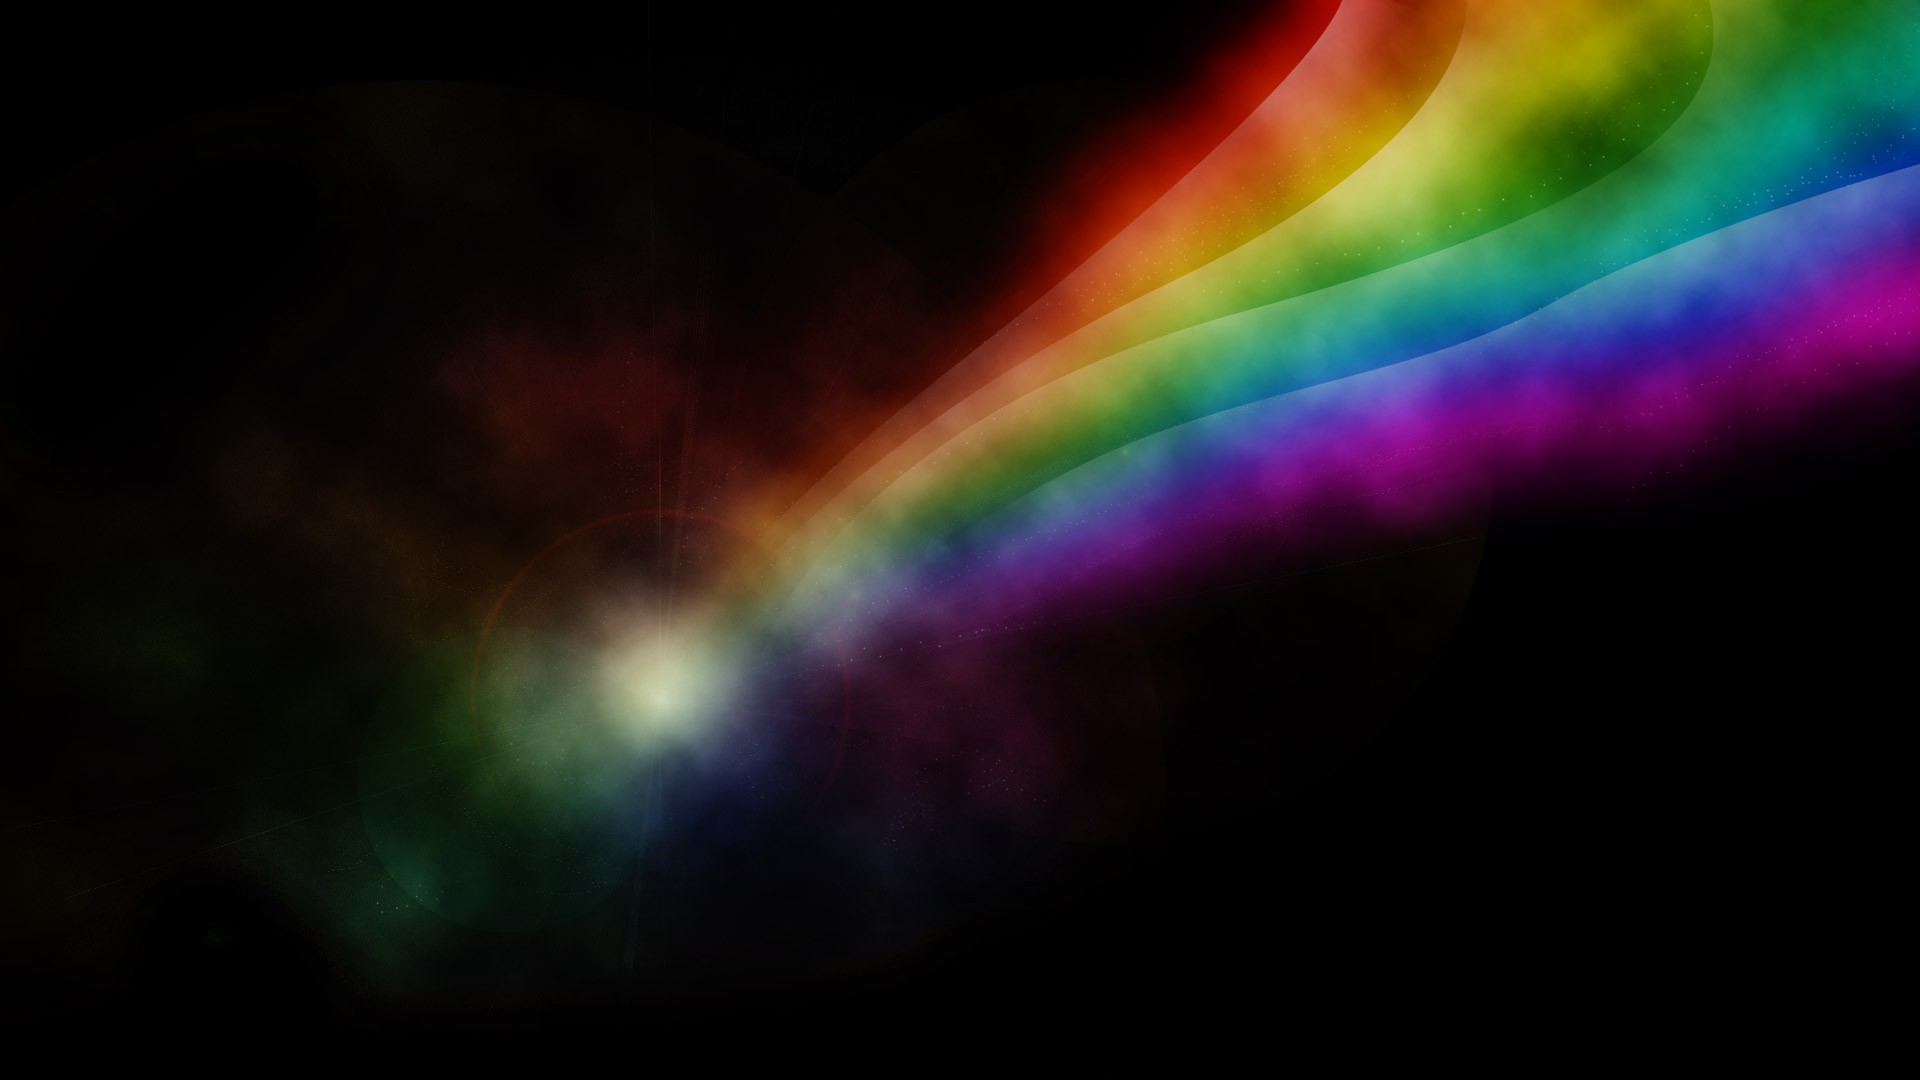 Wallpaper Rainbow with image resolution 1920x1080 pixel. You can use this wallpaper as background for your desktop Computer Screensavers, Android or iPhone smartphones